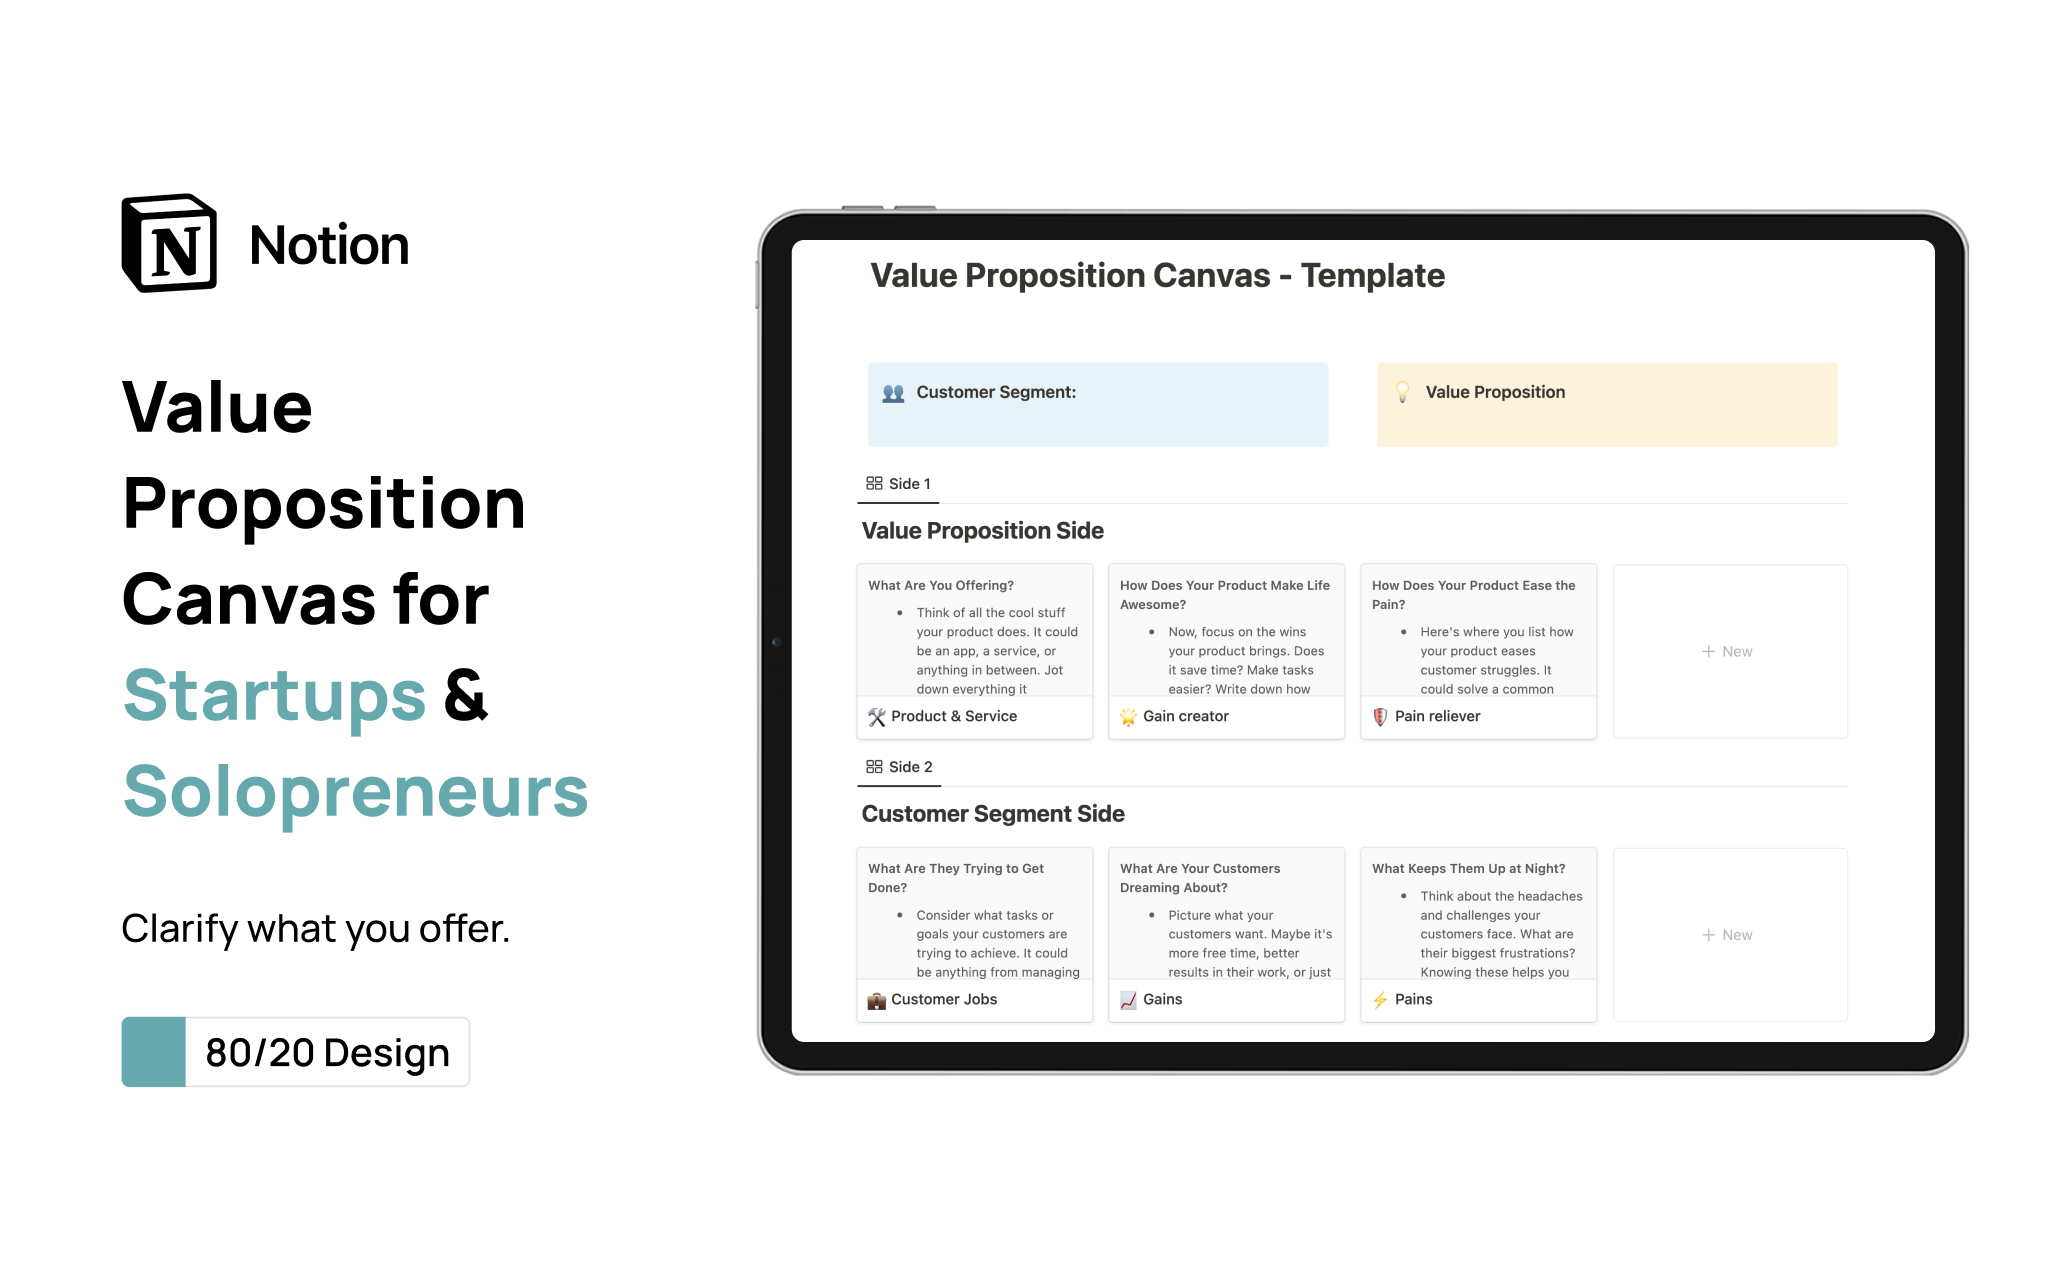 Craft your value clearly with the '🖼️ Value Proposition Canvas' from 80/20 Design. Perfect for solopreneurs and startups, it helps align your offerings with customer needs 🎯.
Dive into www.8020d.com for more tools and guides 🚀.